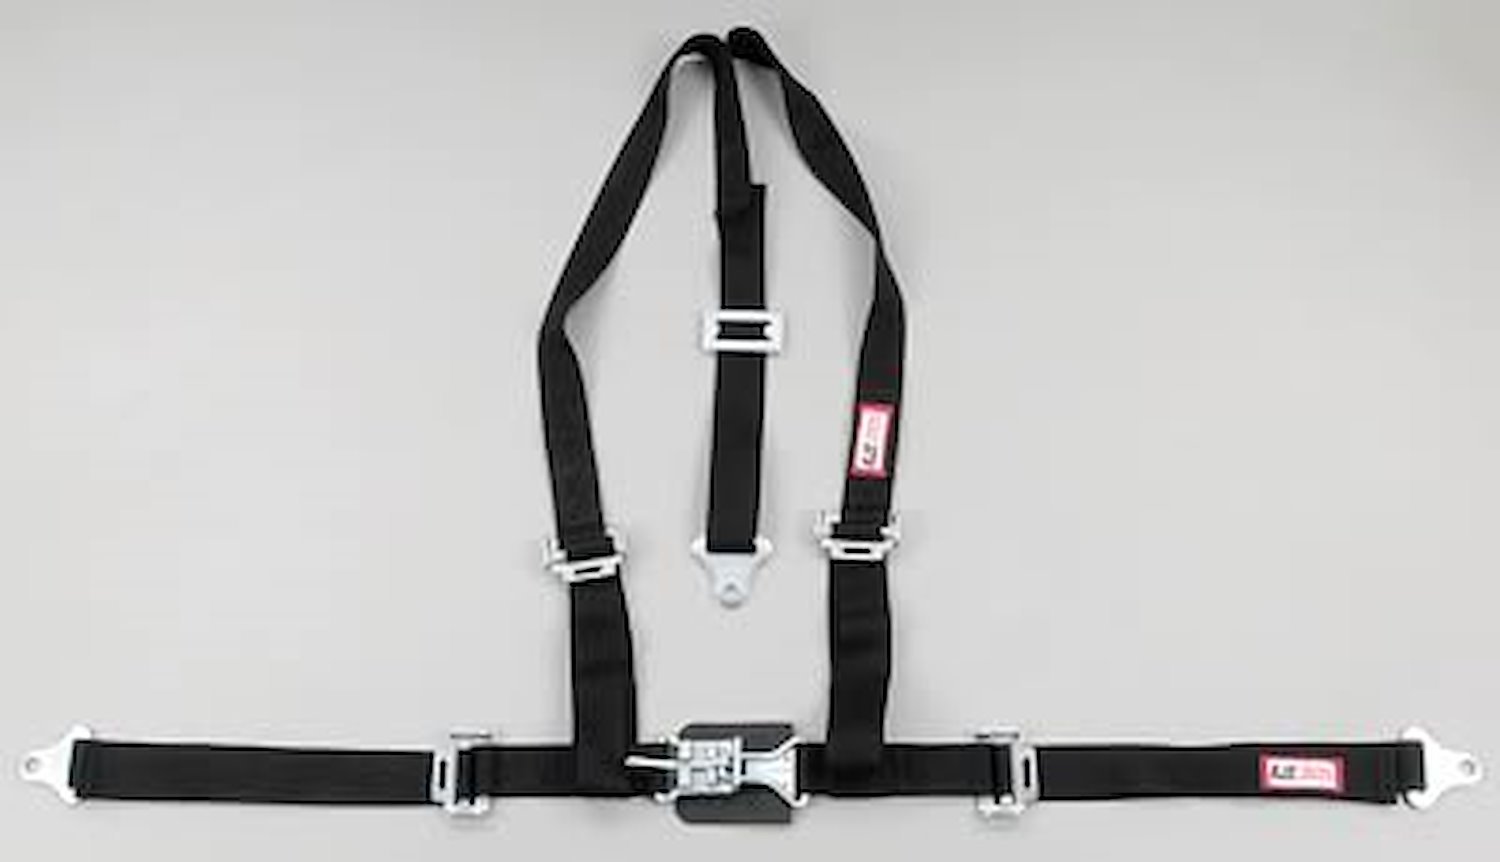 NON-SFI L&L HARNESS 3 PULL UP Lap Belt SEWN IN 2 S.H. Individual FLOOR Mount w/STERNUM STRAP ALL WRAP ENDS YELLOW